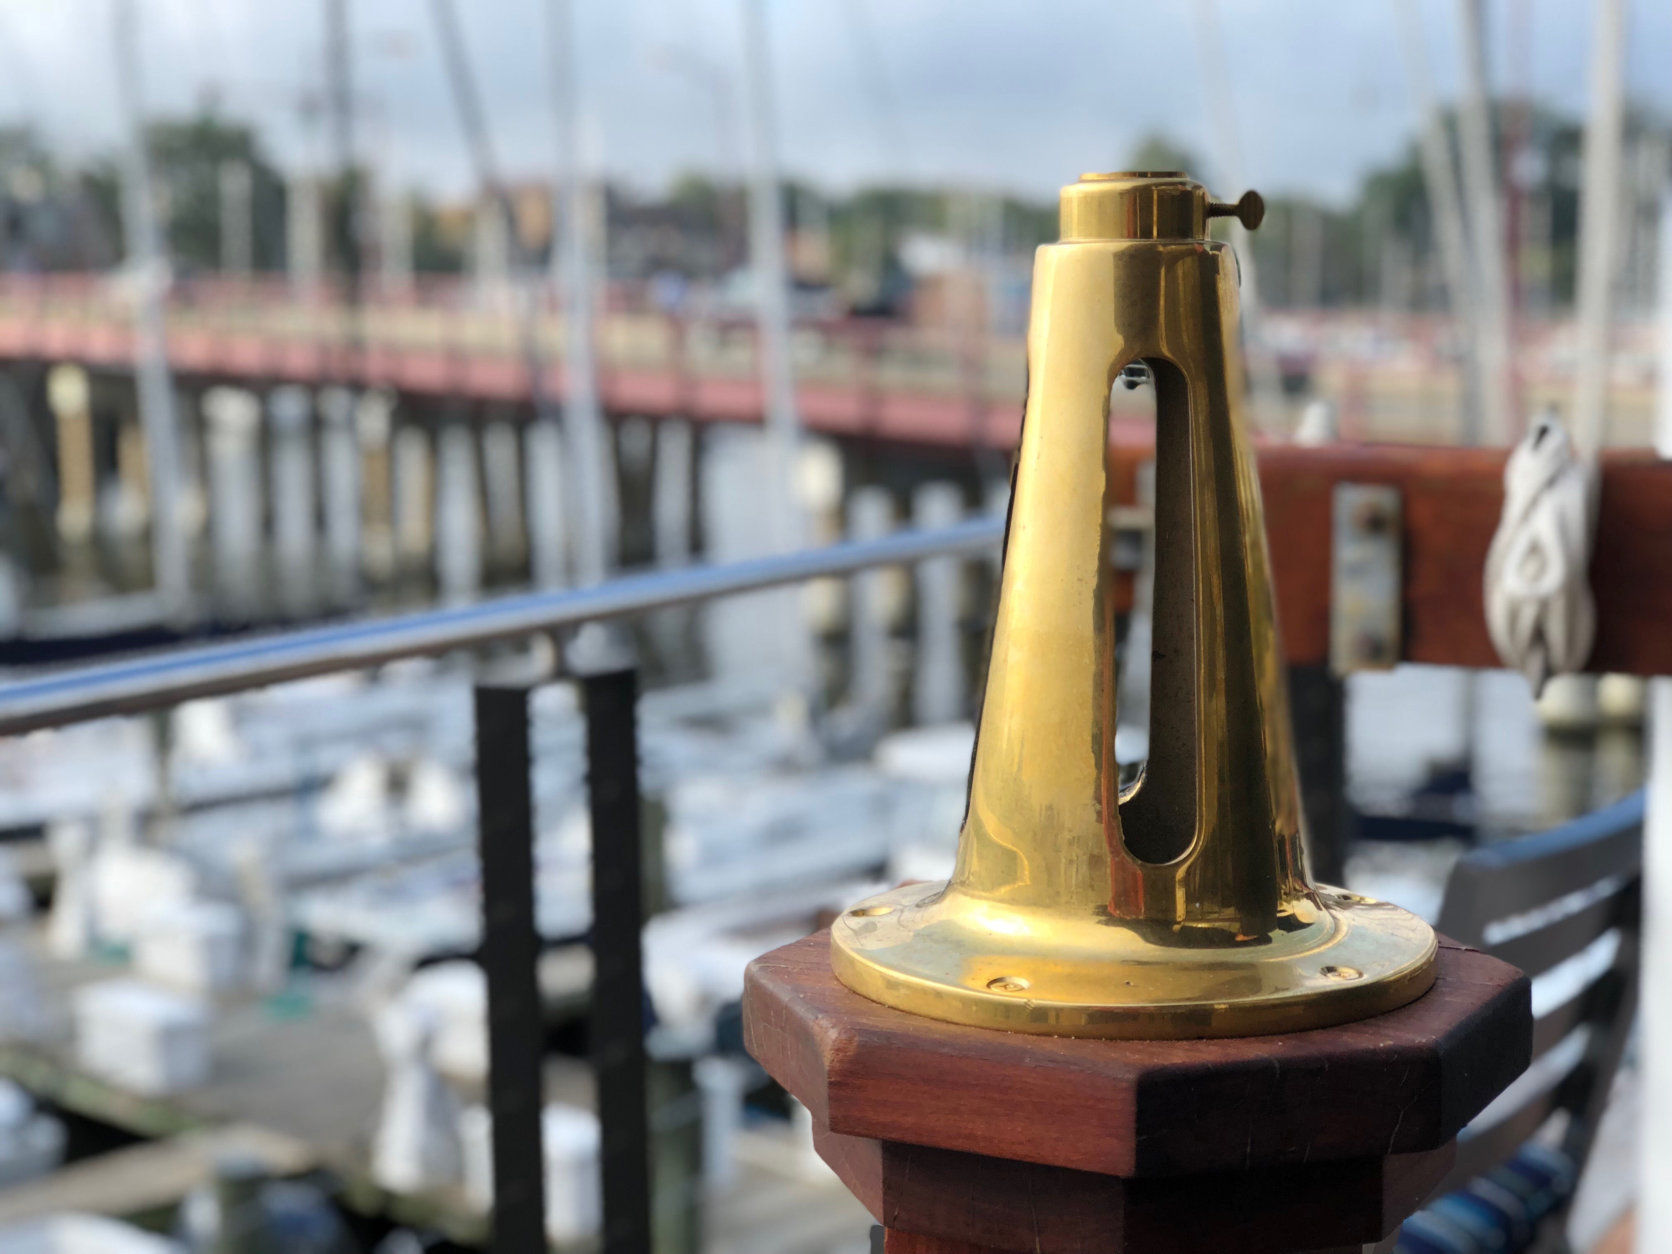 The cannon mount at the Annapolis Yacht Club. (WTOP/Kate Ryan)